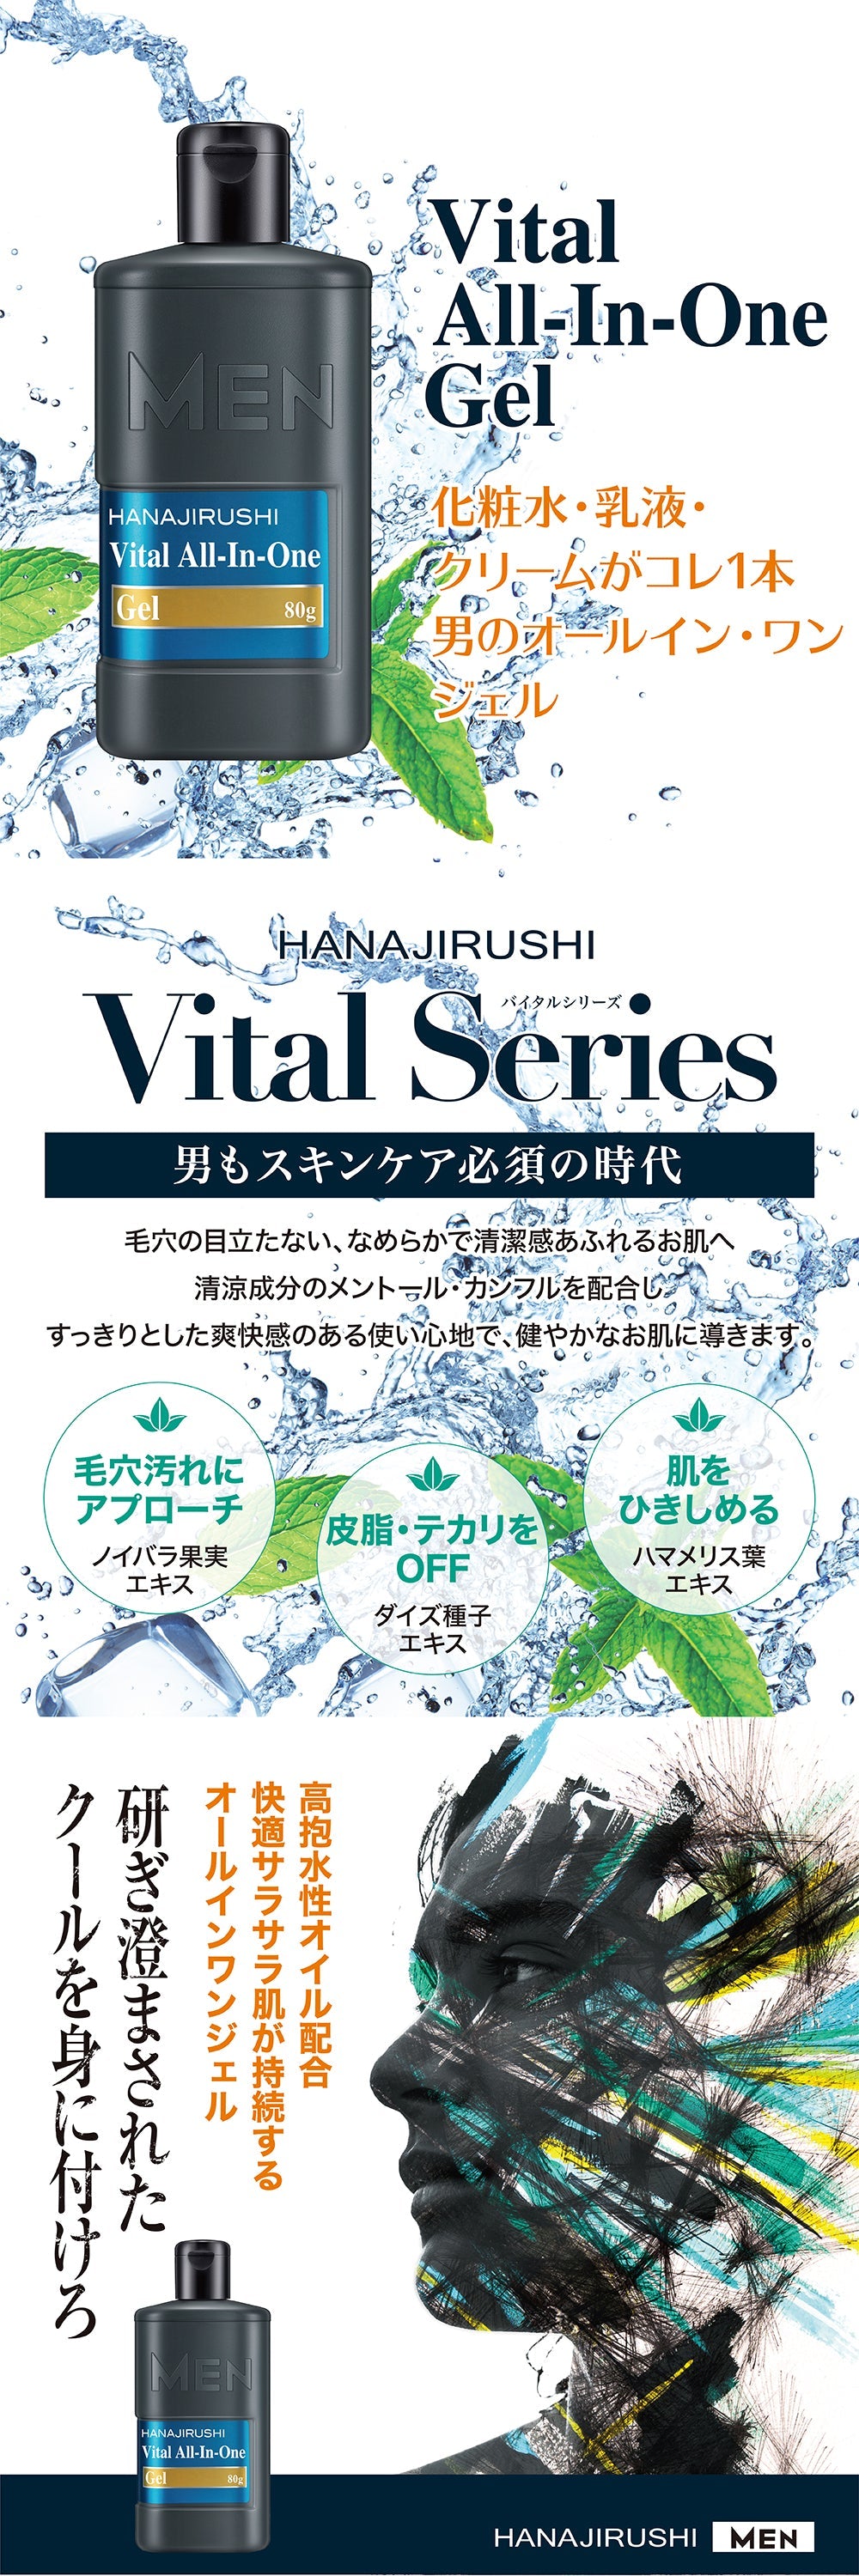 Men's Hanajirushi Vital All-in-One Gel: Highly water-holding oil, gel-type beauty essence for men's cosmetics and aftershave, suitable for dry and sensitive skin, travel size